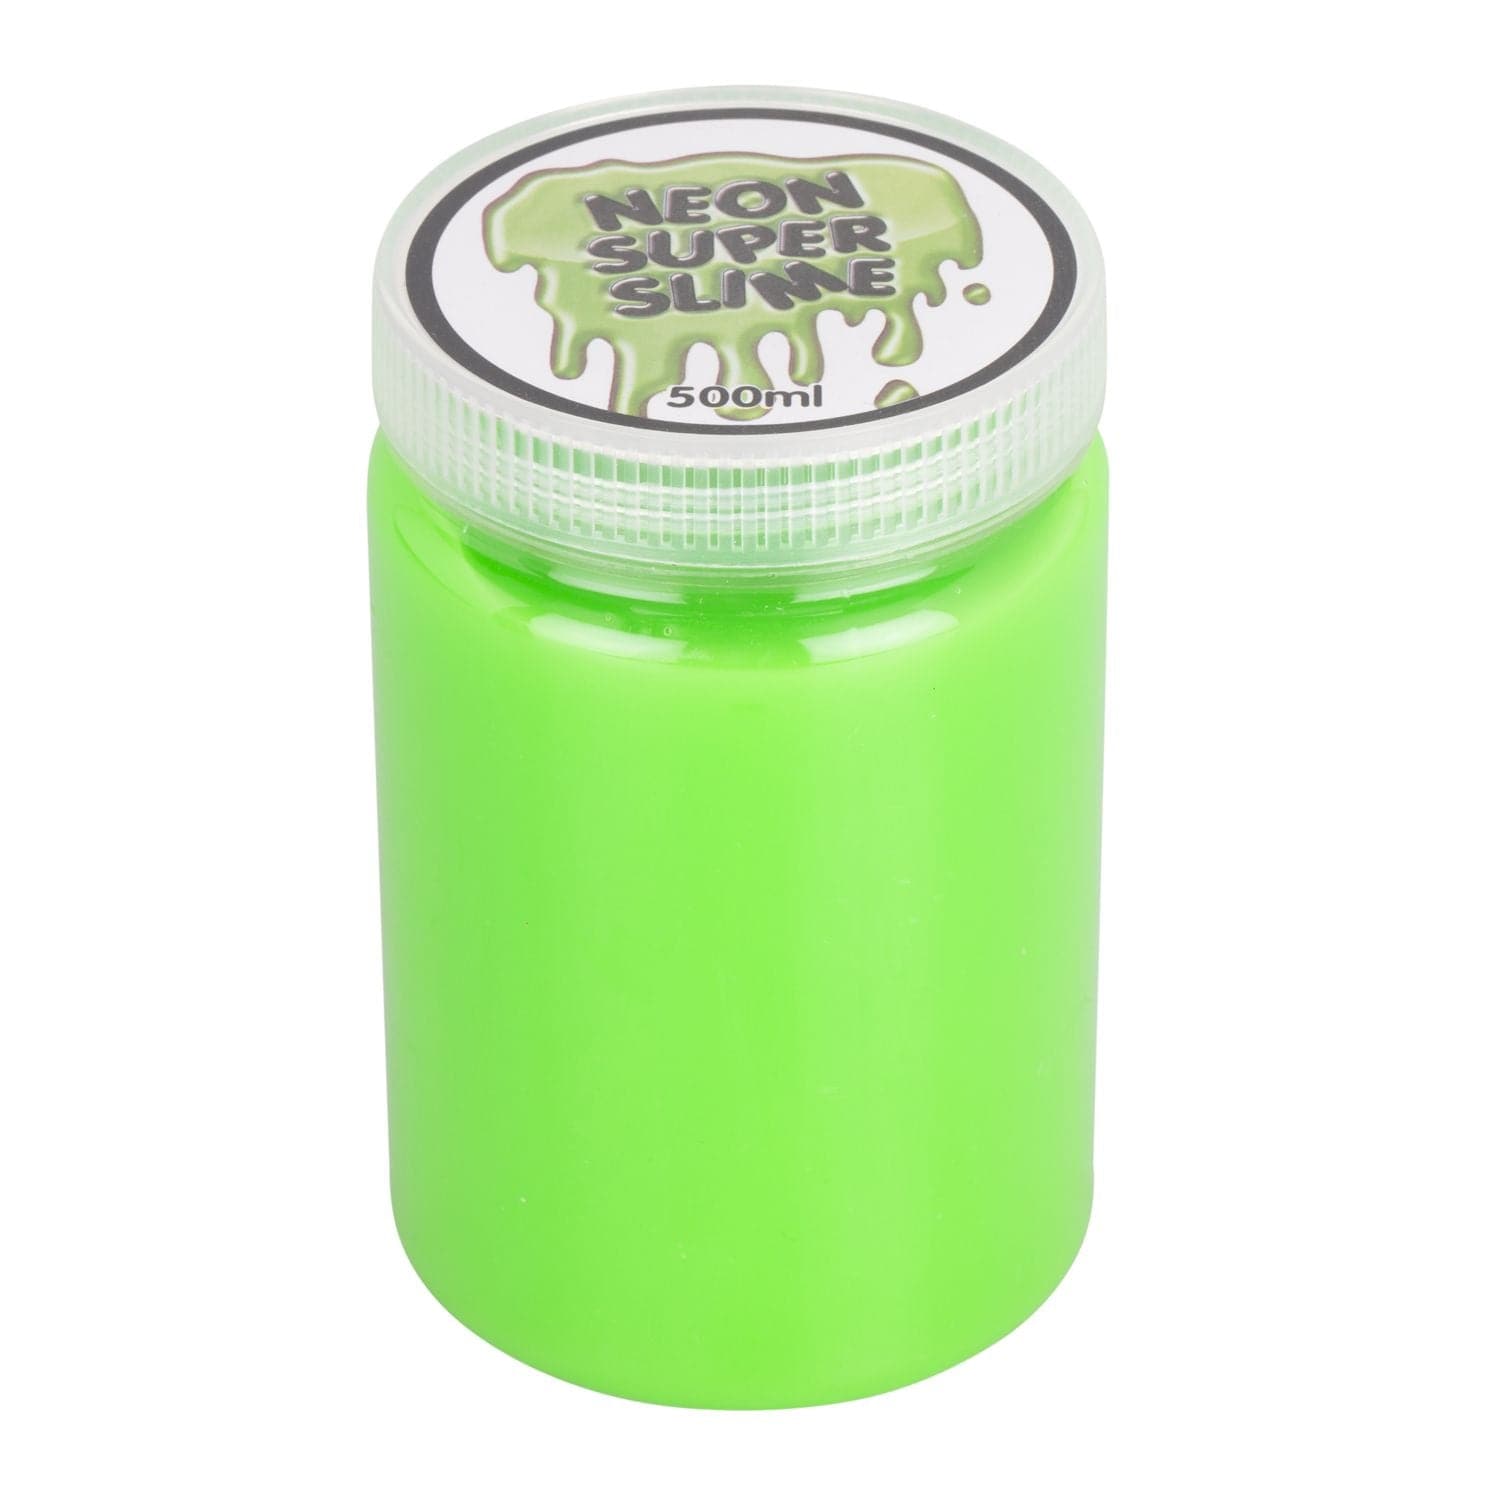 500 ML Jumbo Neon Slime, Jumbo size 500ml version of our Neon Slime. This large plastic barrel is filled with vibrant neon-like Jumbo Neon Slime. Pop off the lid and slide it out onto your hand to enjoy the unique tactile sensation of this Jumbo Neon Slime. Stores back in the pot to stay fresh between uses. The Jumbo Neon Slime is available in three assorted colours including purple,purple,pink Large barrel of slime Vibrant neon-like colours Unique tactile experience Stores in barrel to retain freshness, 50